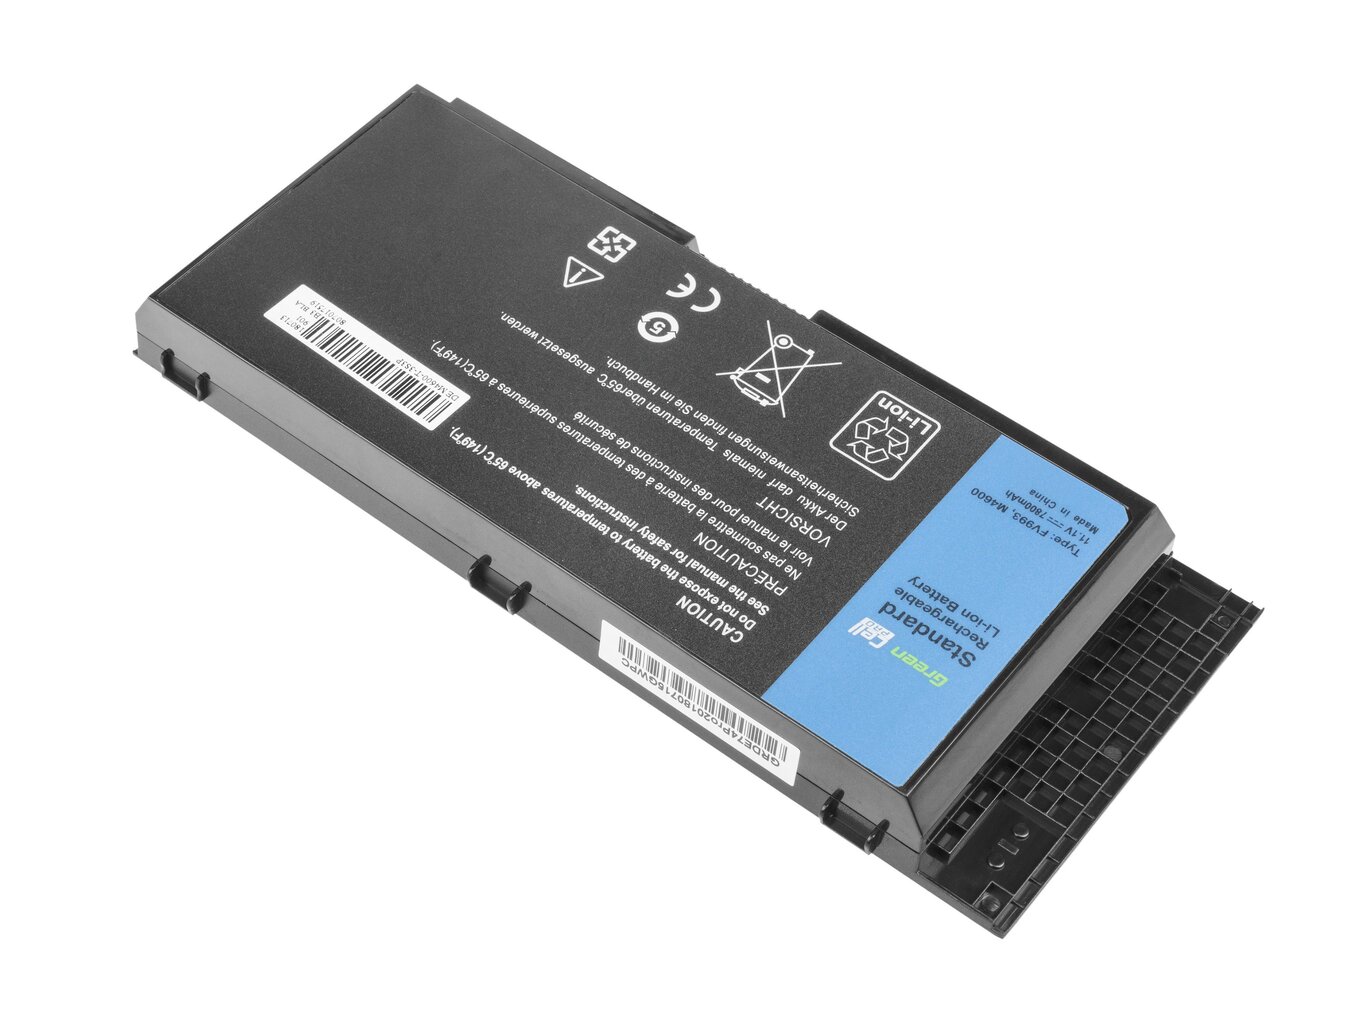 Green Cell PRO Laptop Battery FV993 for Dell Precision M4600 M4700 M4800 M6600 M6700 hind ja info | Sülearvuti akud | kaup24.ee